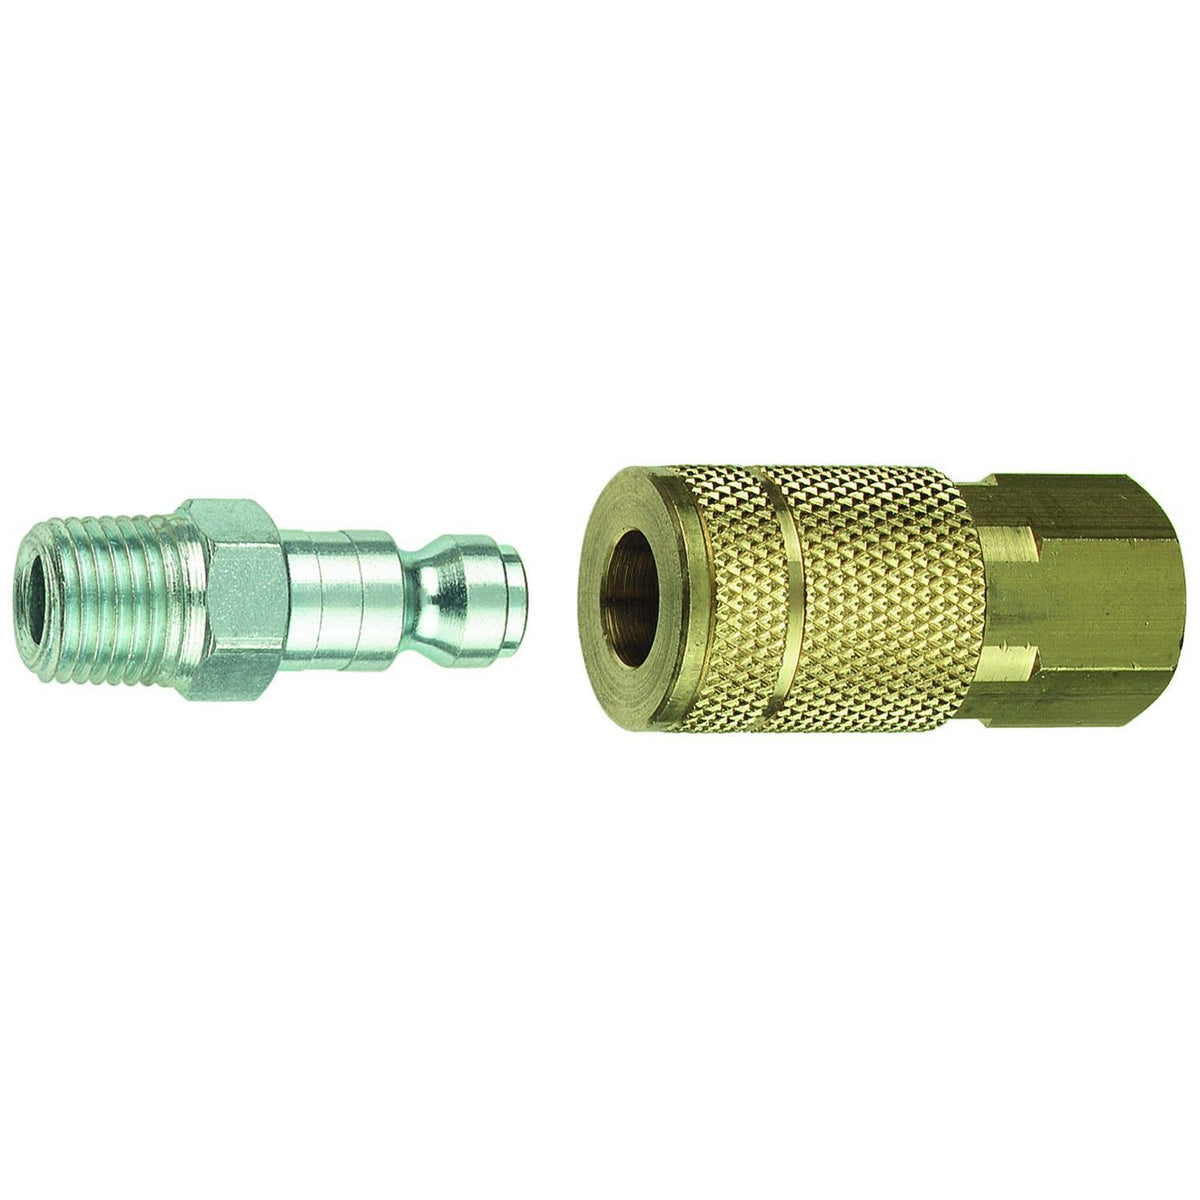 buy air compressors hose couplers at cheap rate in bulk. wholesale & retail construction hand tools store. home décor ideas, maintenance, repair replacement parts